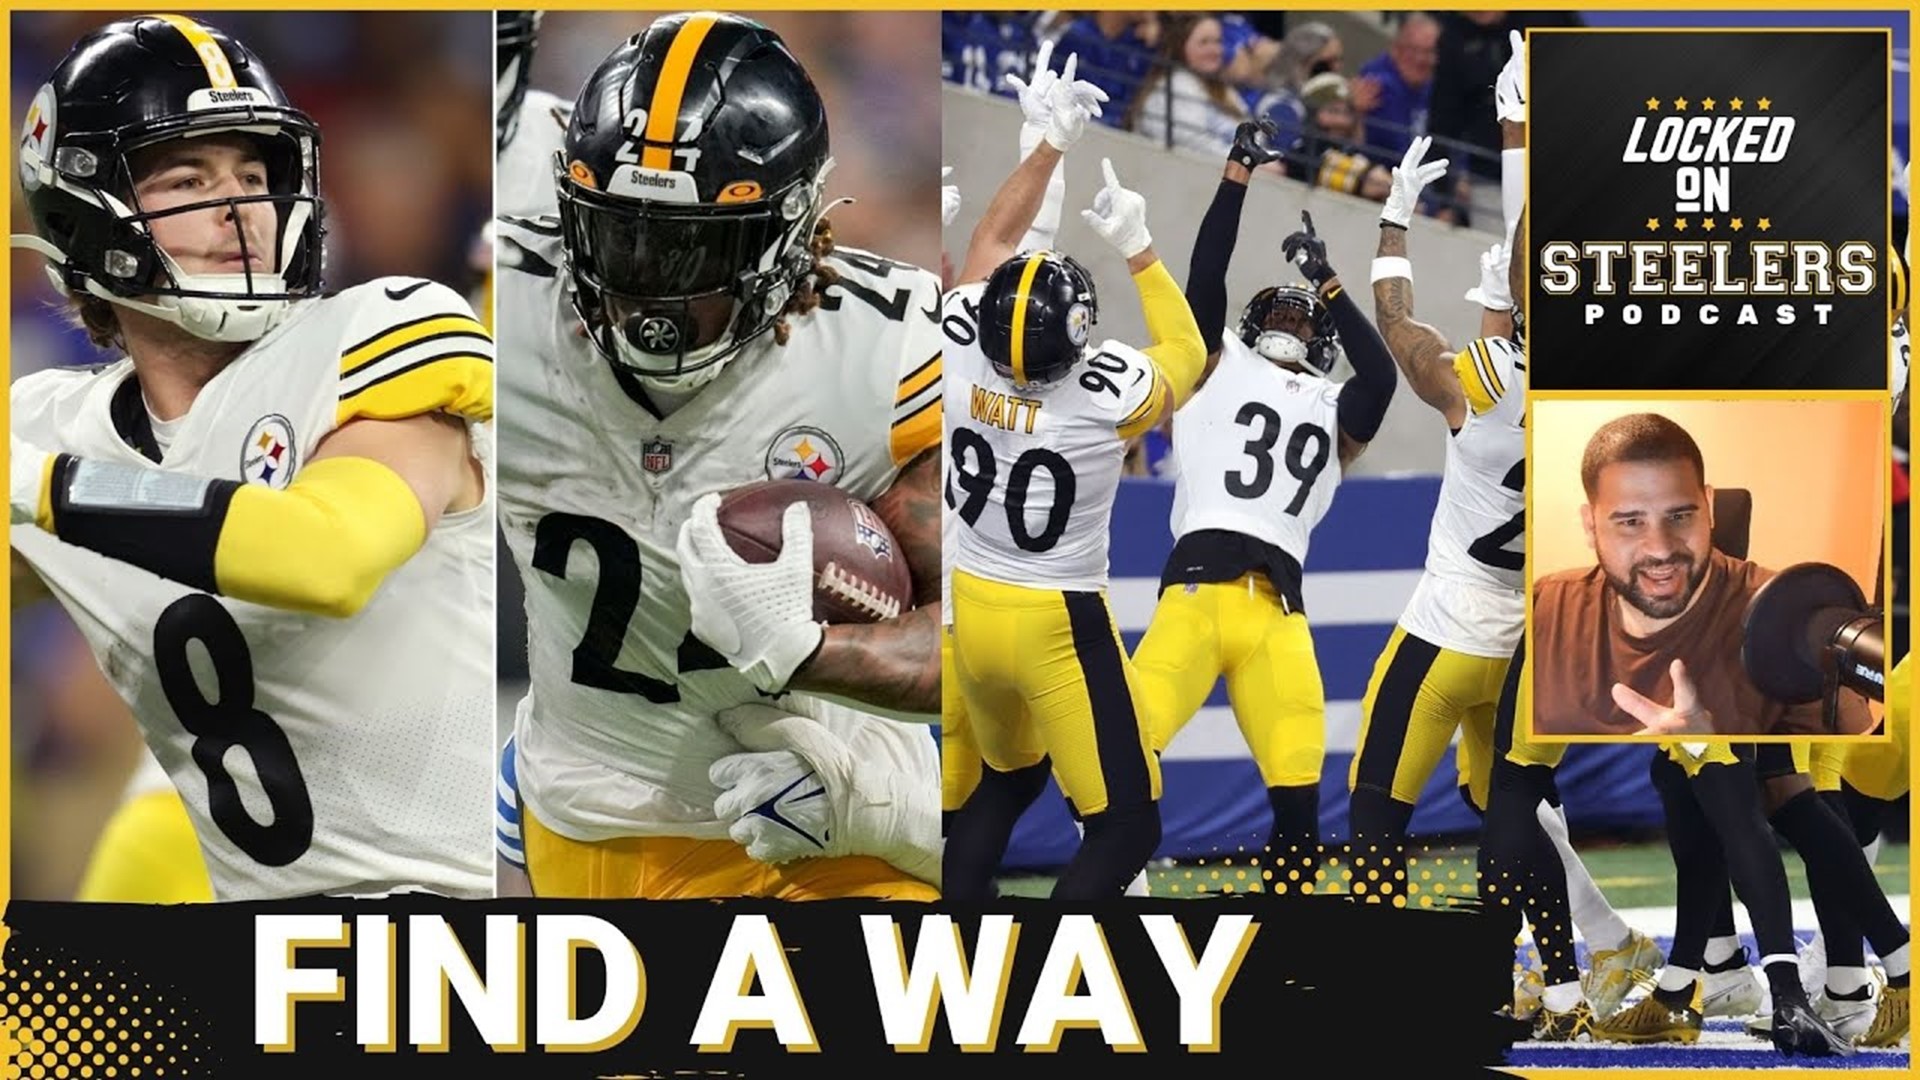 The Pittsburgh Steelers needed a win in a desperate way, and came away victorious on Monday night football, 24-17 over the Indianapolis Colts.